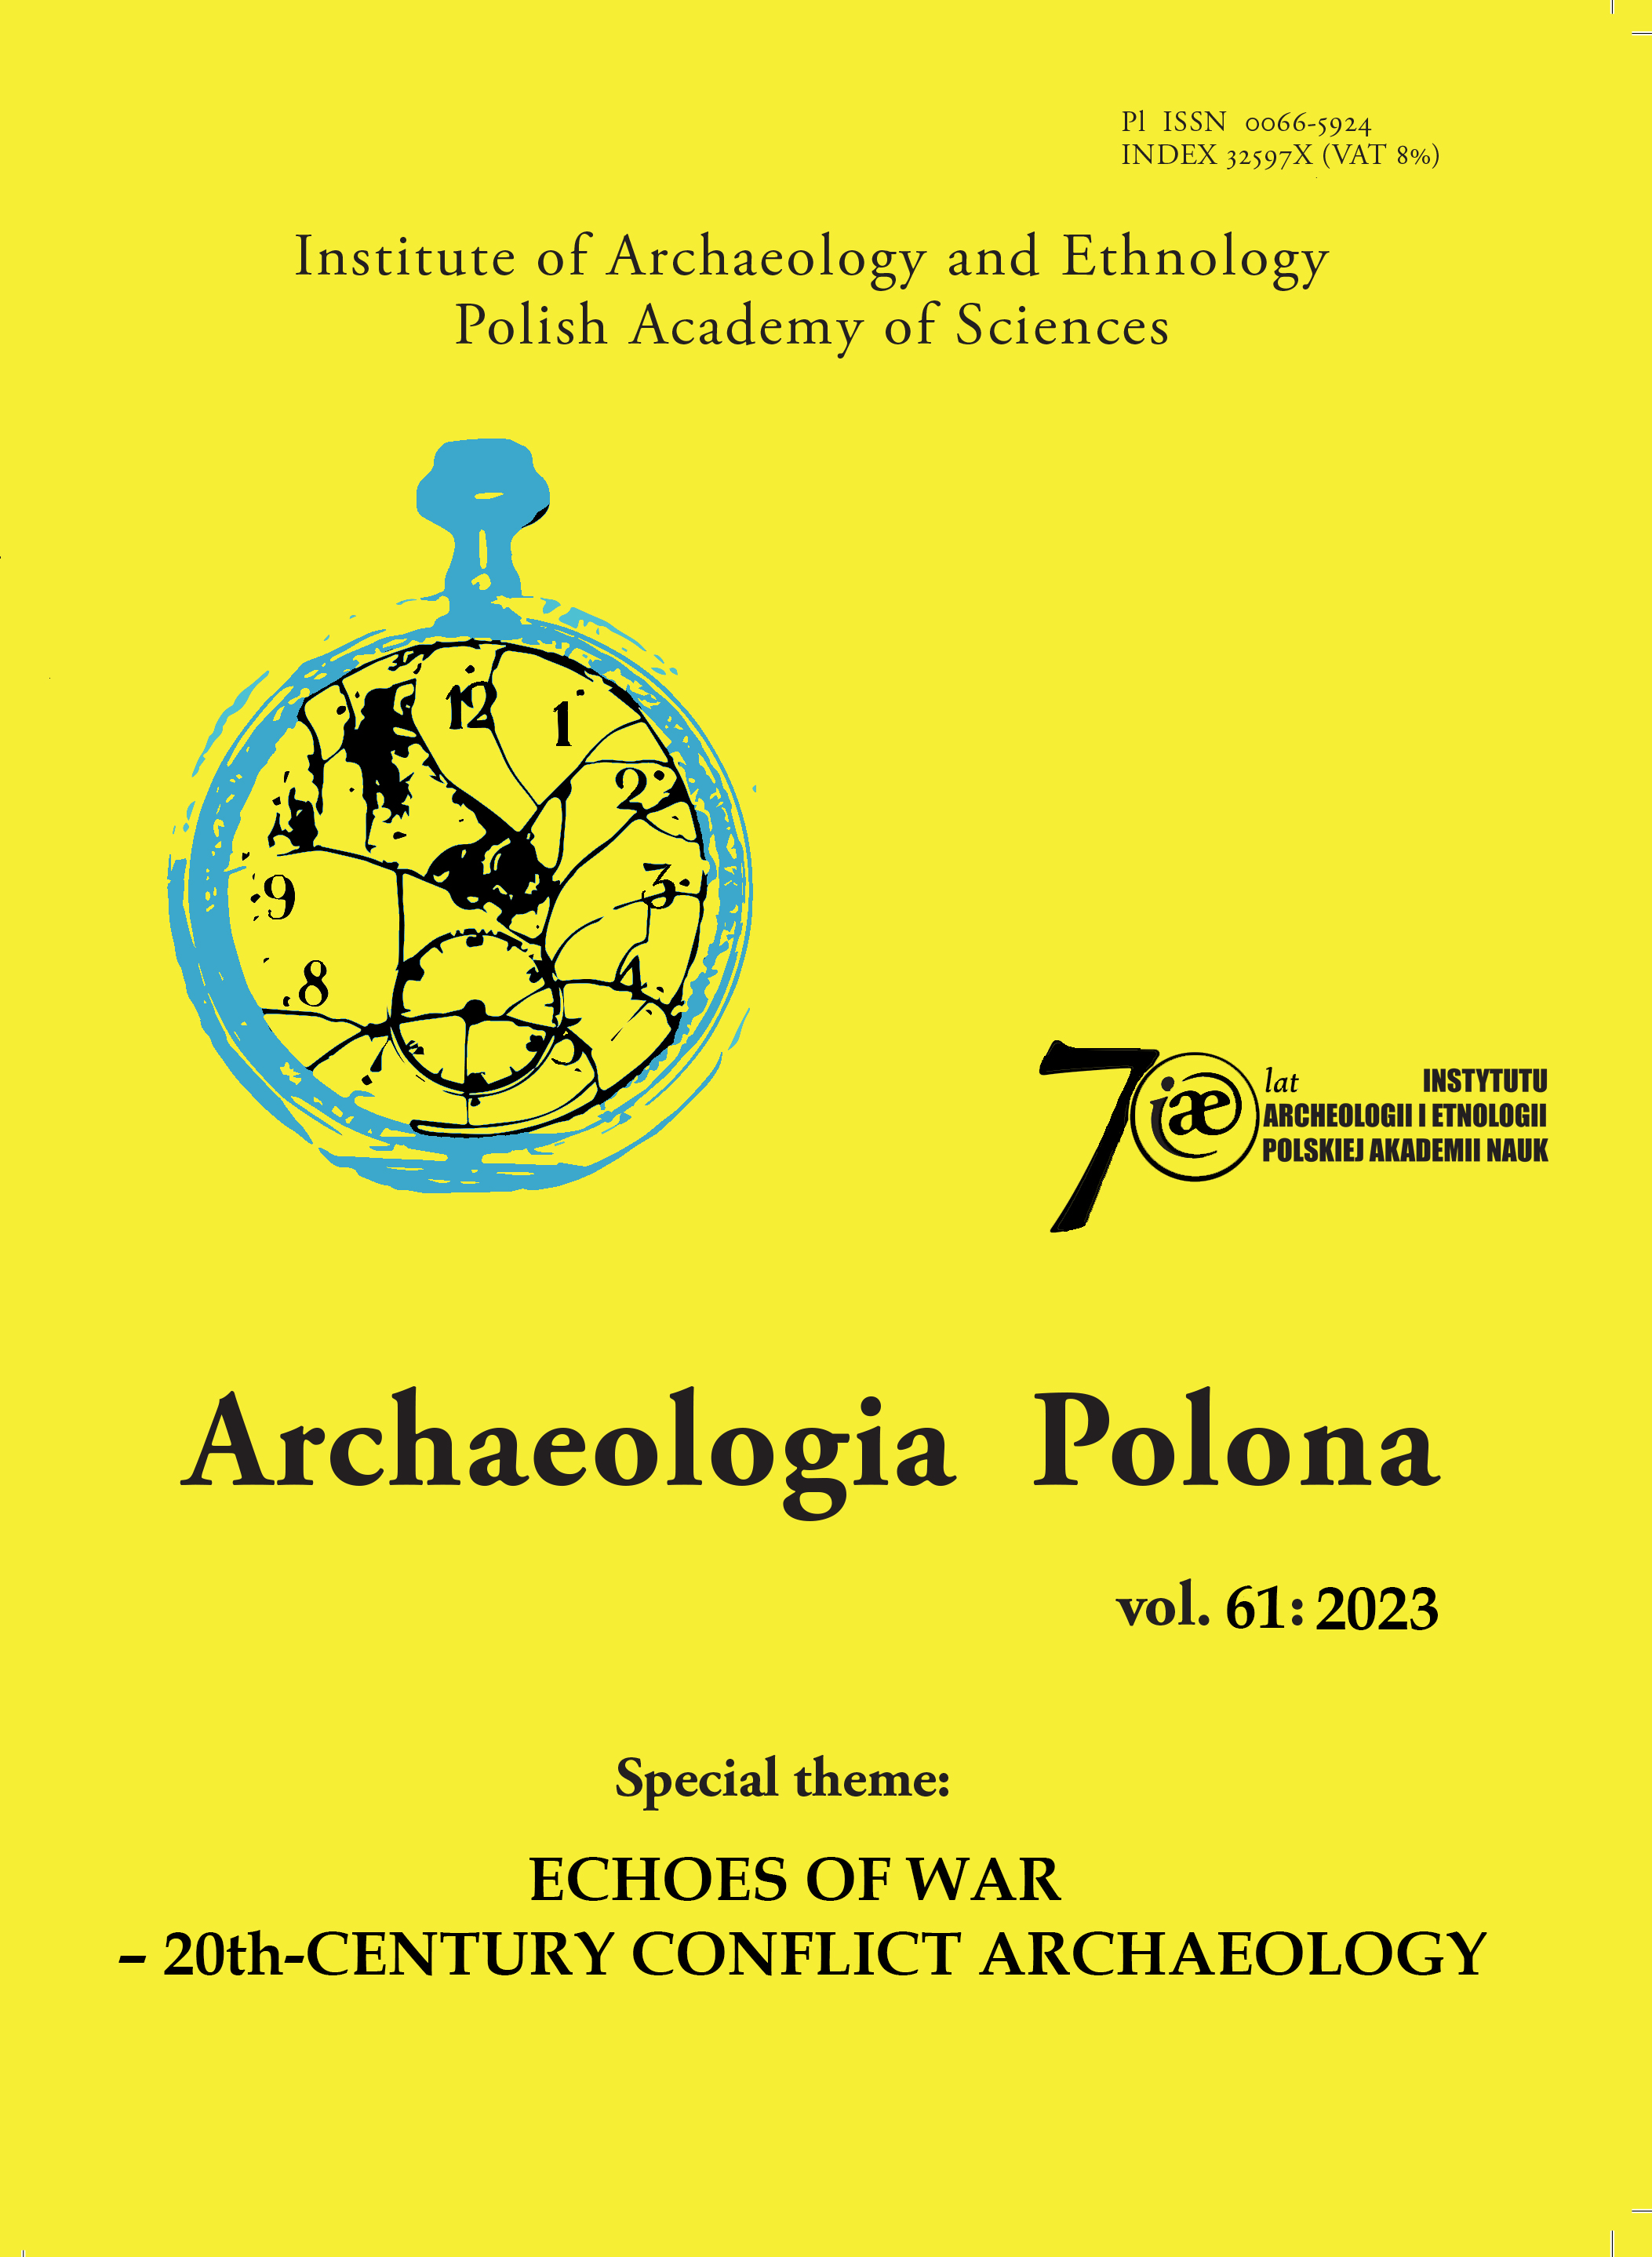 					View Vol. 61 (2023): ECHOES OF WAR – 20th-CENTURY CONFLICT ARCHAEOLOGY
				